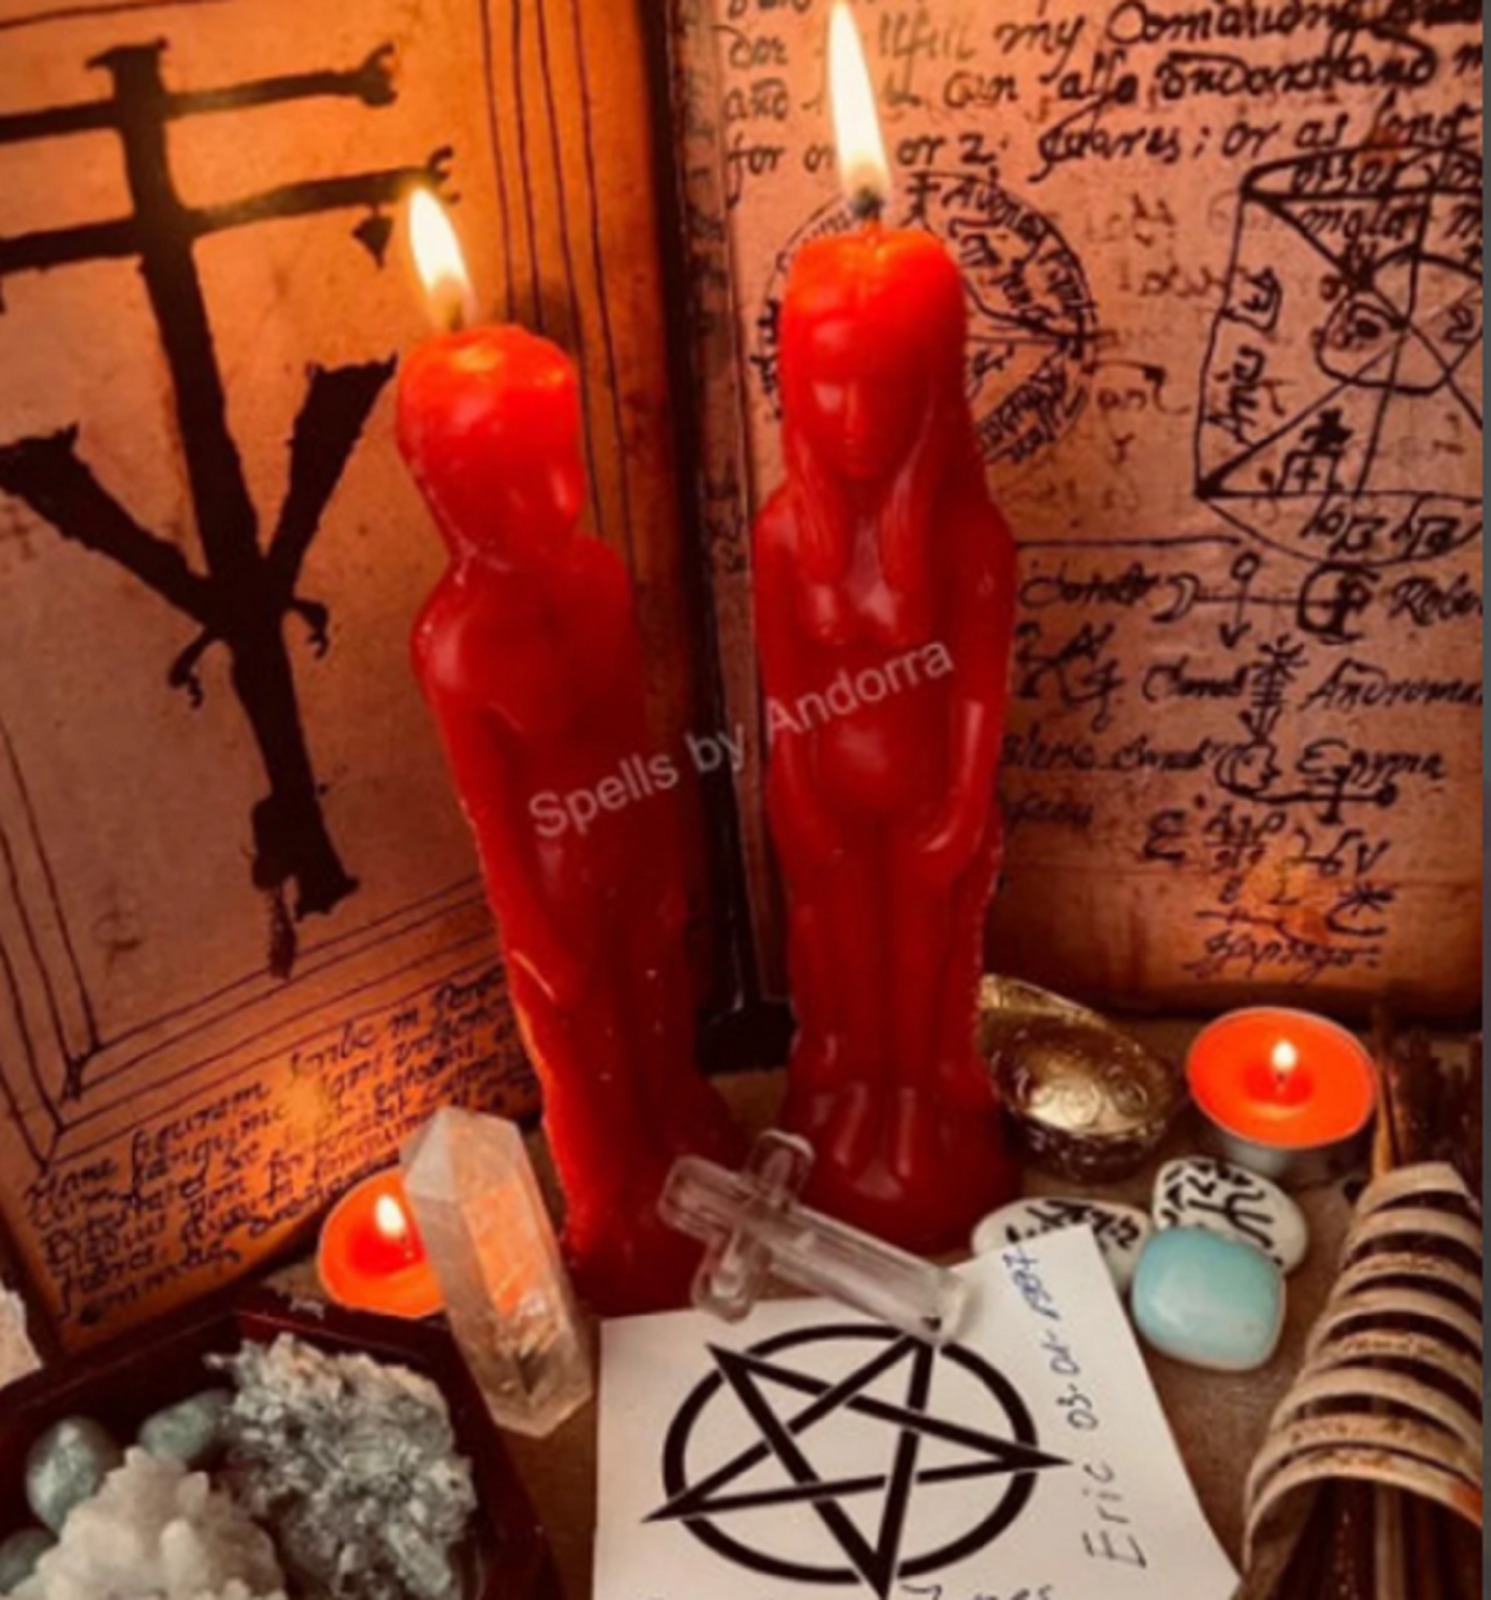 EXTREME SEX SPELL - Lust Passion Desire, Magnetic Love Attraction and Obsession